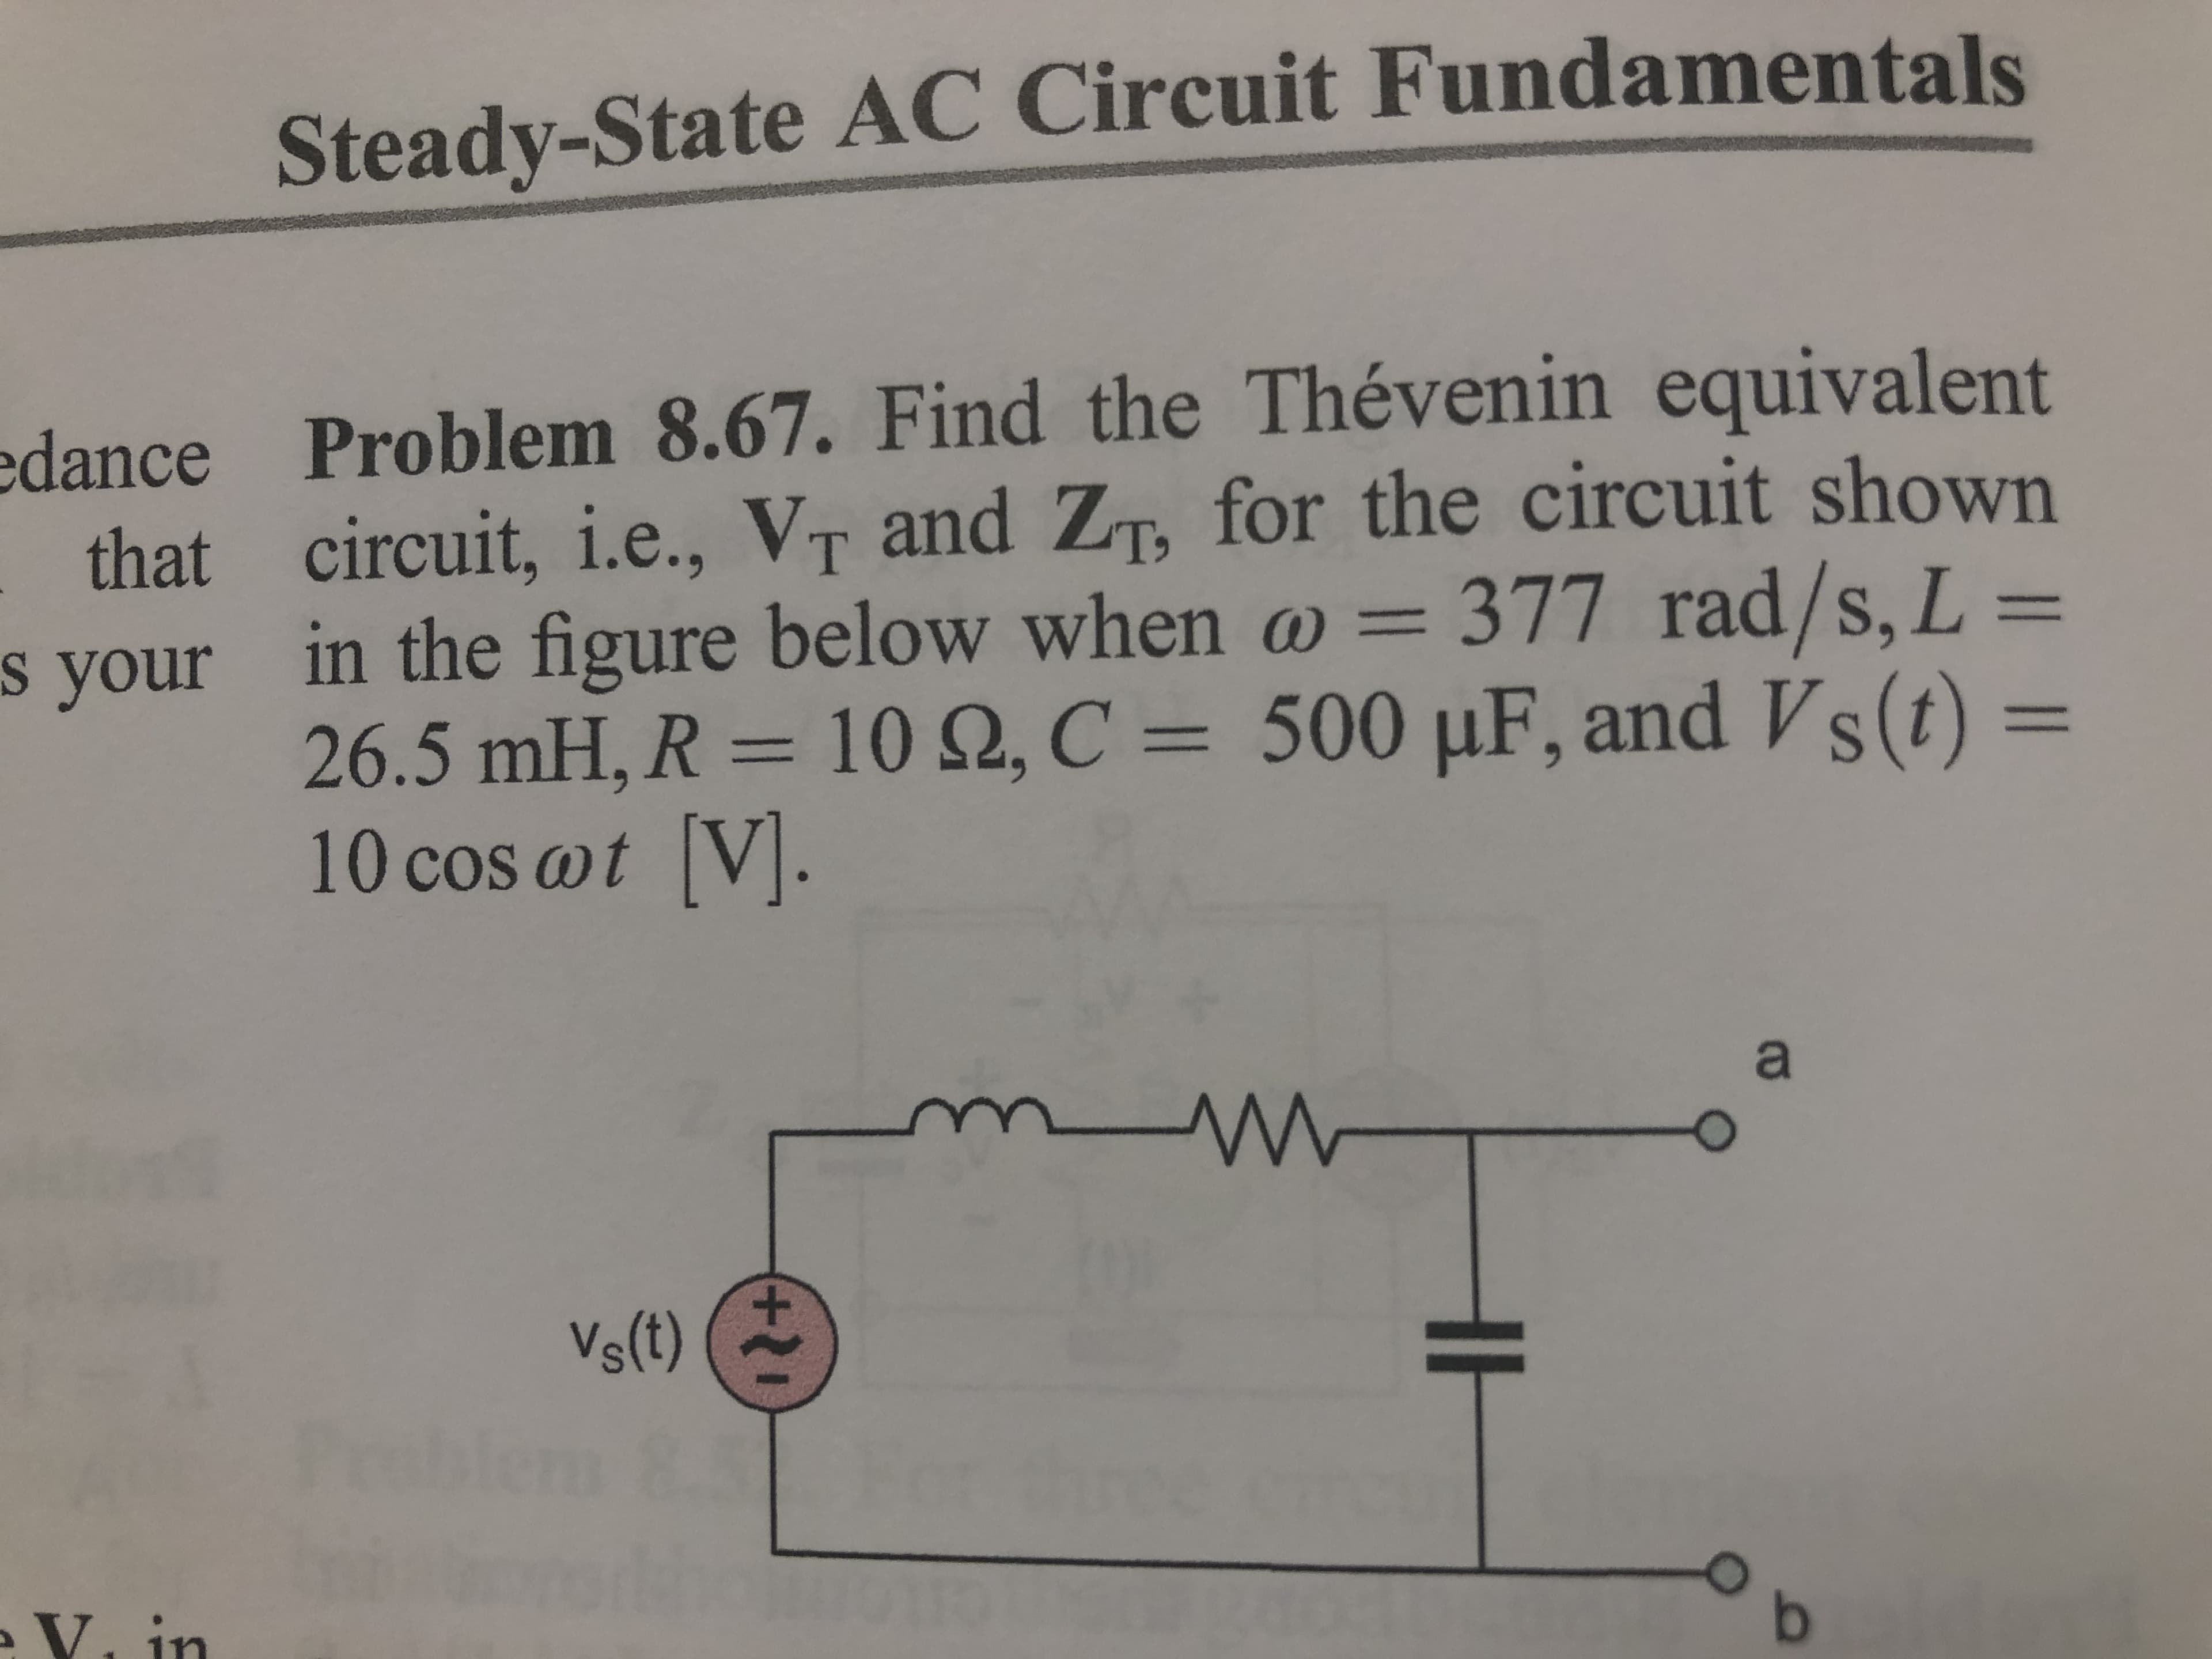 Steady-State AC Circuit Fundamentals
edance Problem 8.67. Find the Thévenin equivalent
that circuit, i.e., VT and ZT, for the circuit shown
s your in the figure below when o =
377 rad/s, L=
%3D
26.5 mH, R = 10 Q, C = 500 µF, and Vs(t) =
10 cos wt V.
%3D
a
Vs(t)
lem
V. in
